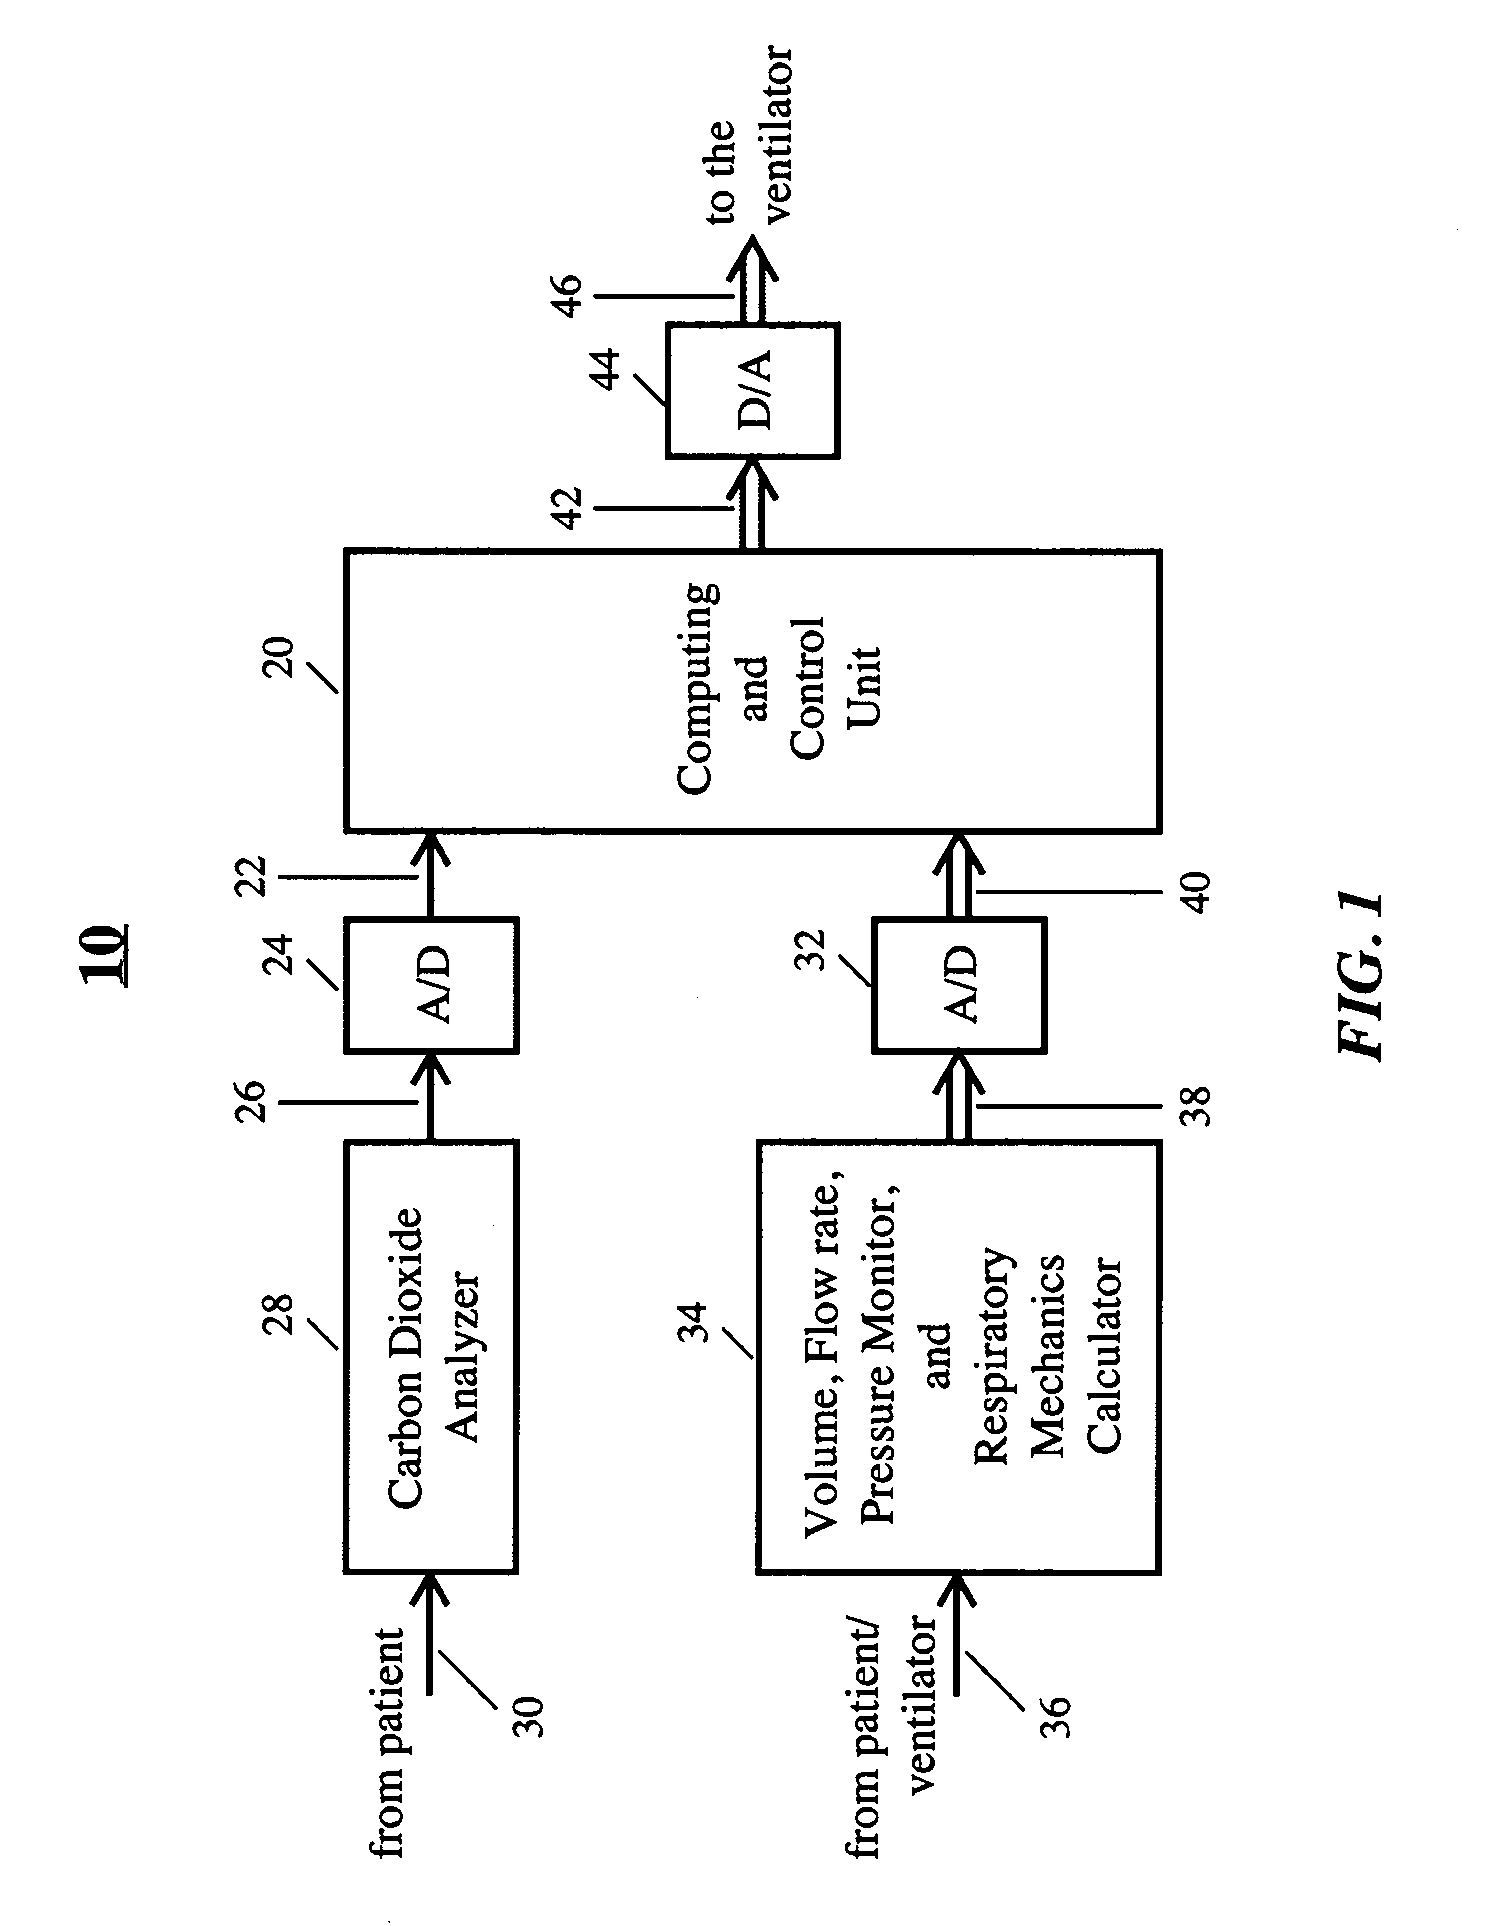 Automatic Control System For Mechanical Ventilation For Active Or Passive Subjects